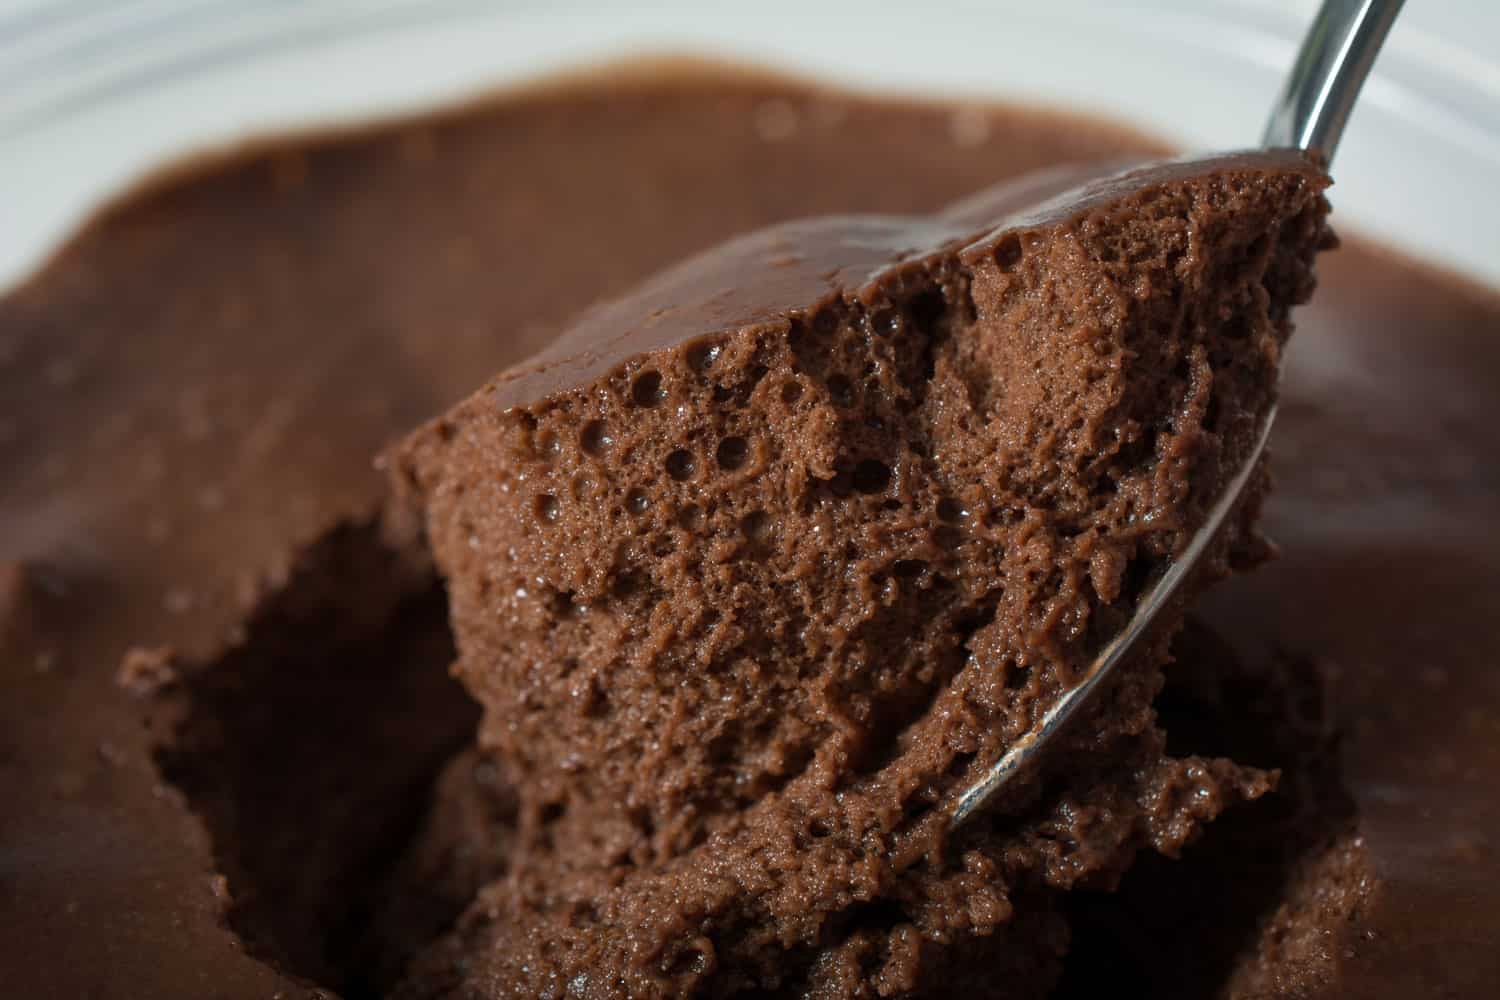 Chcolate mousse and its fluffy texture specially when tasted it like it melts your mouth with it